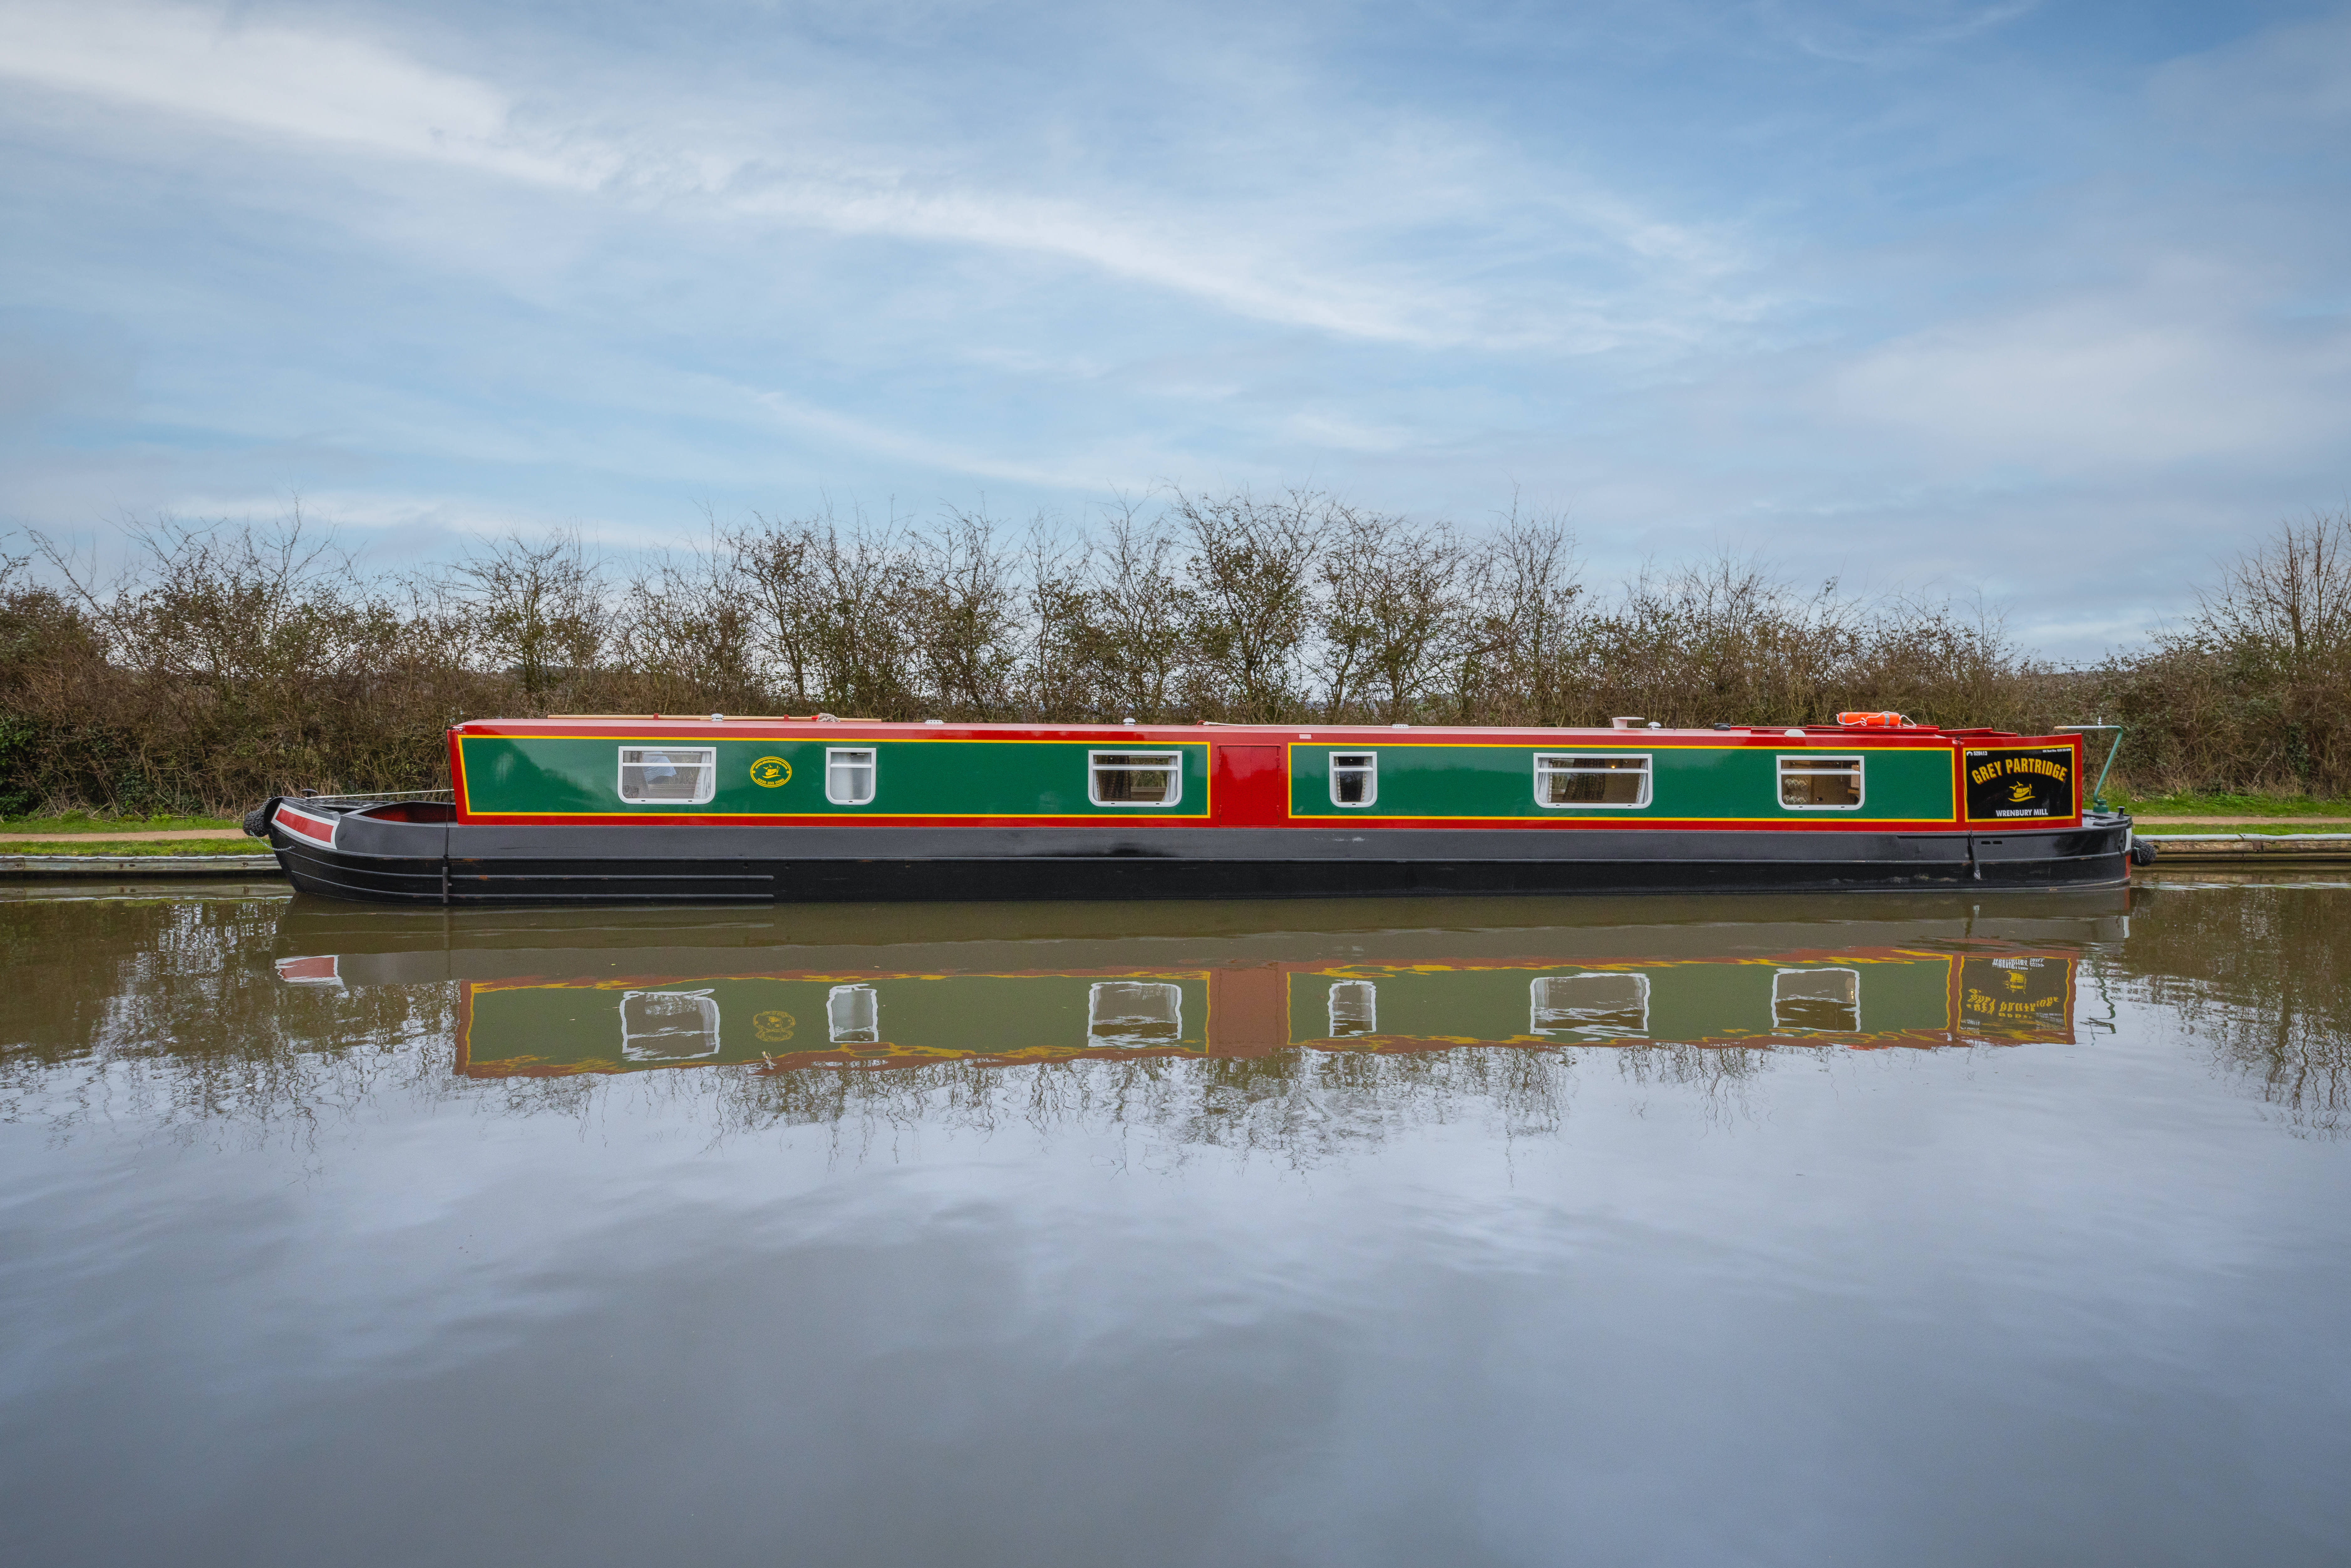 The Grey Partridge canal boat.  This boat is a Partridge boat class